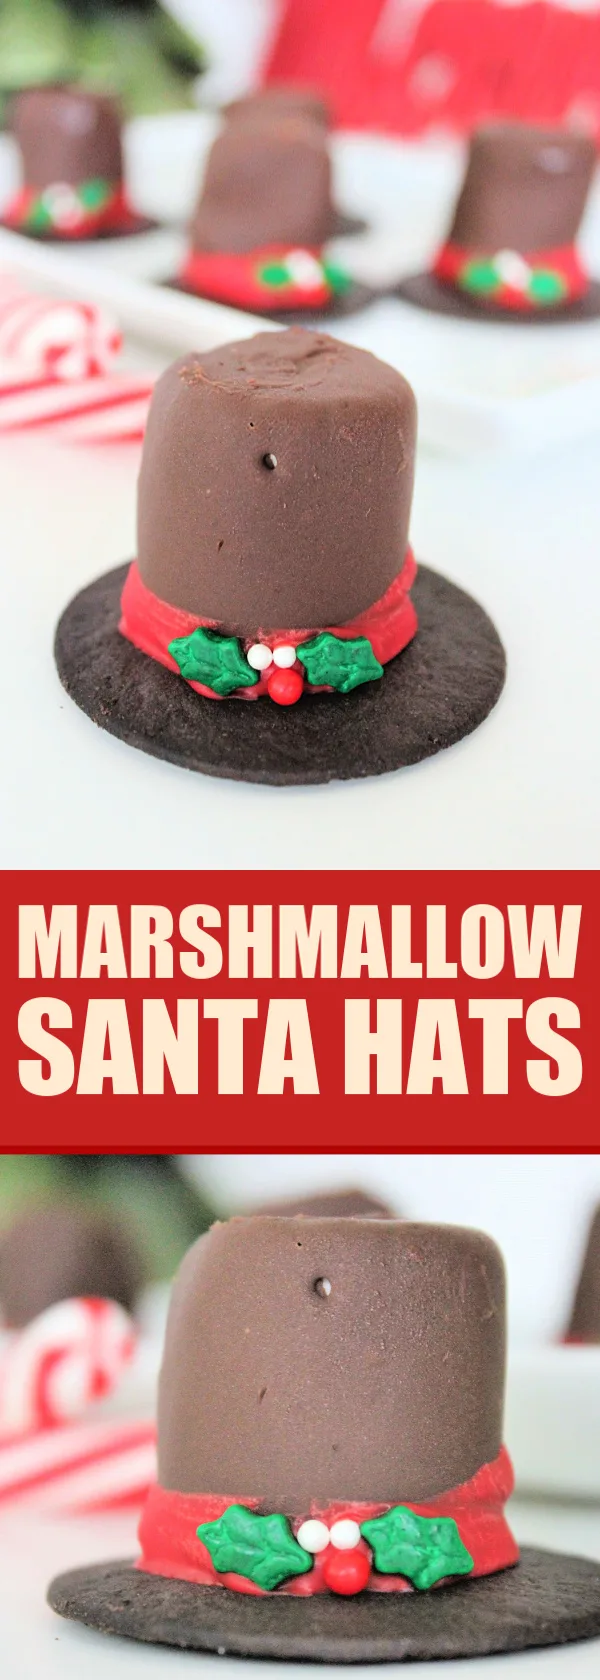 These Marshmallow Frosty Hats are a tasty, seasonal treat that can be eaten alone or serve as adorable cupcake toppers!